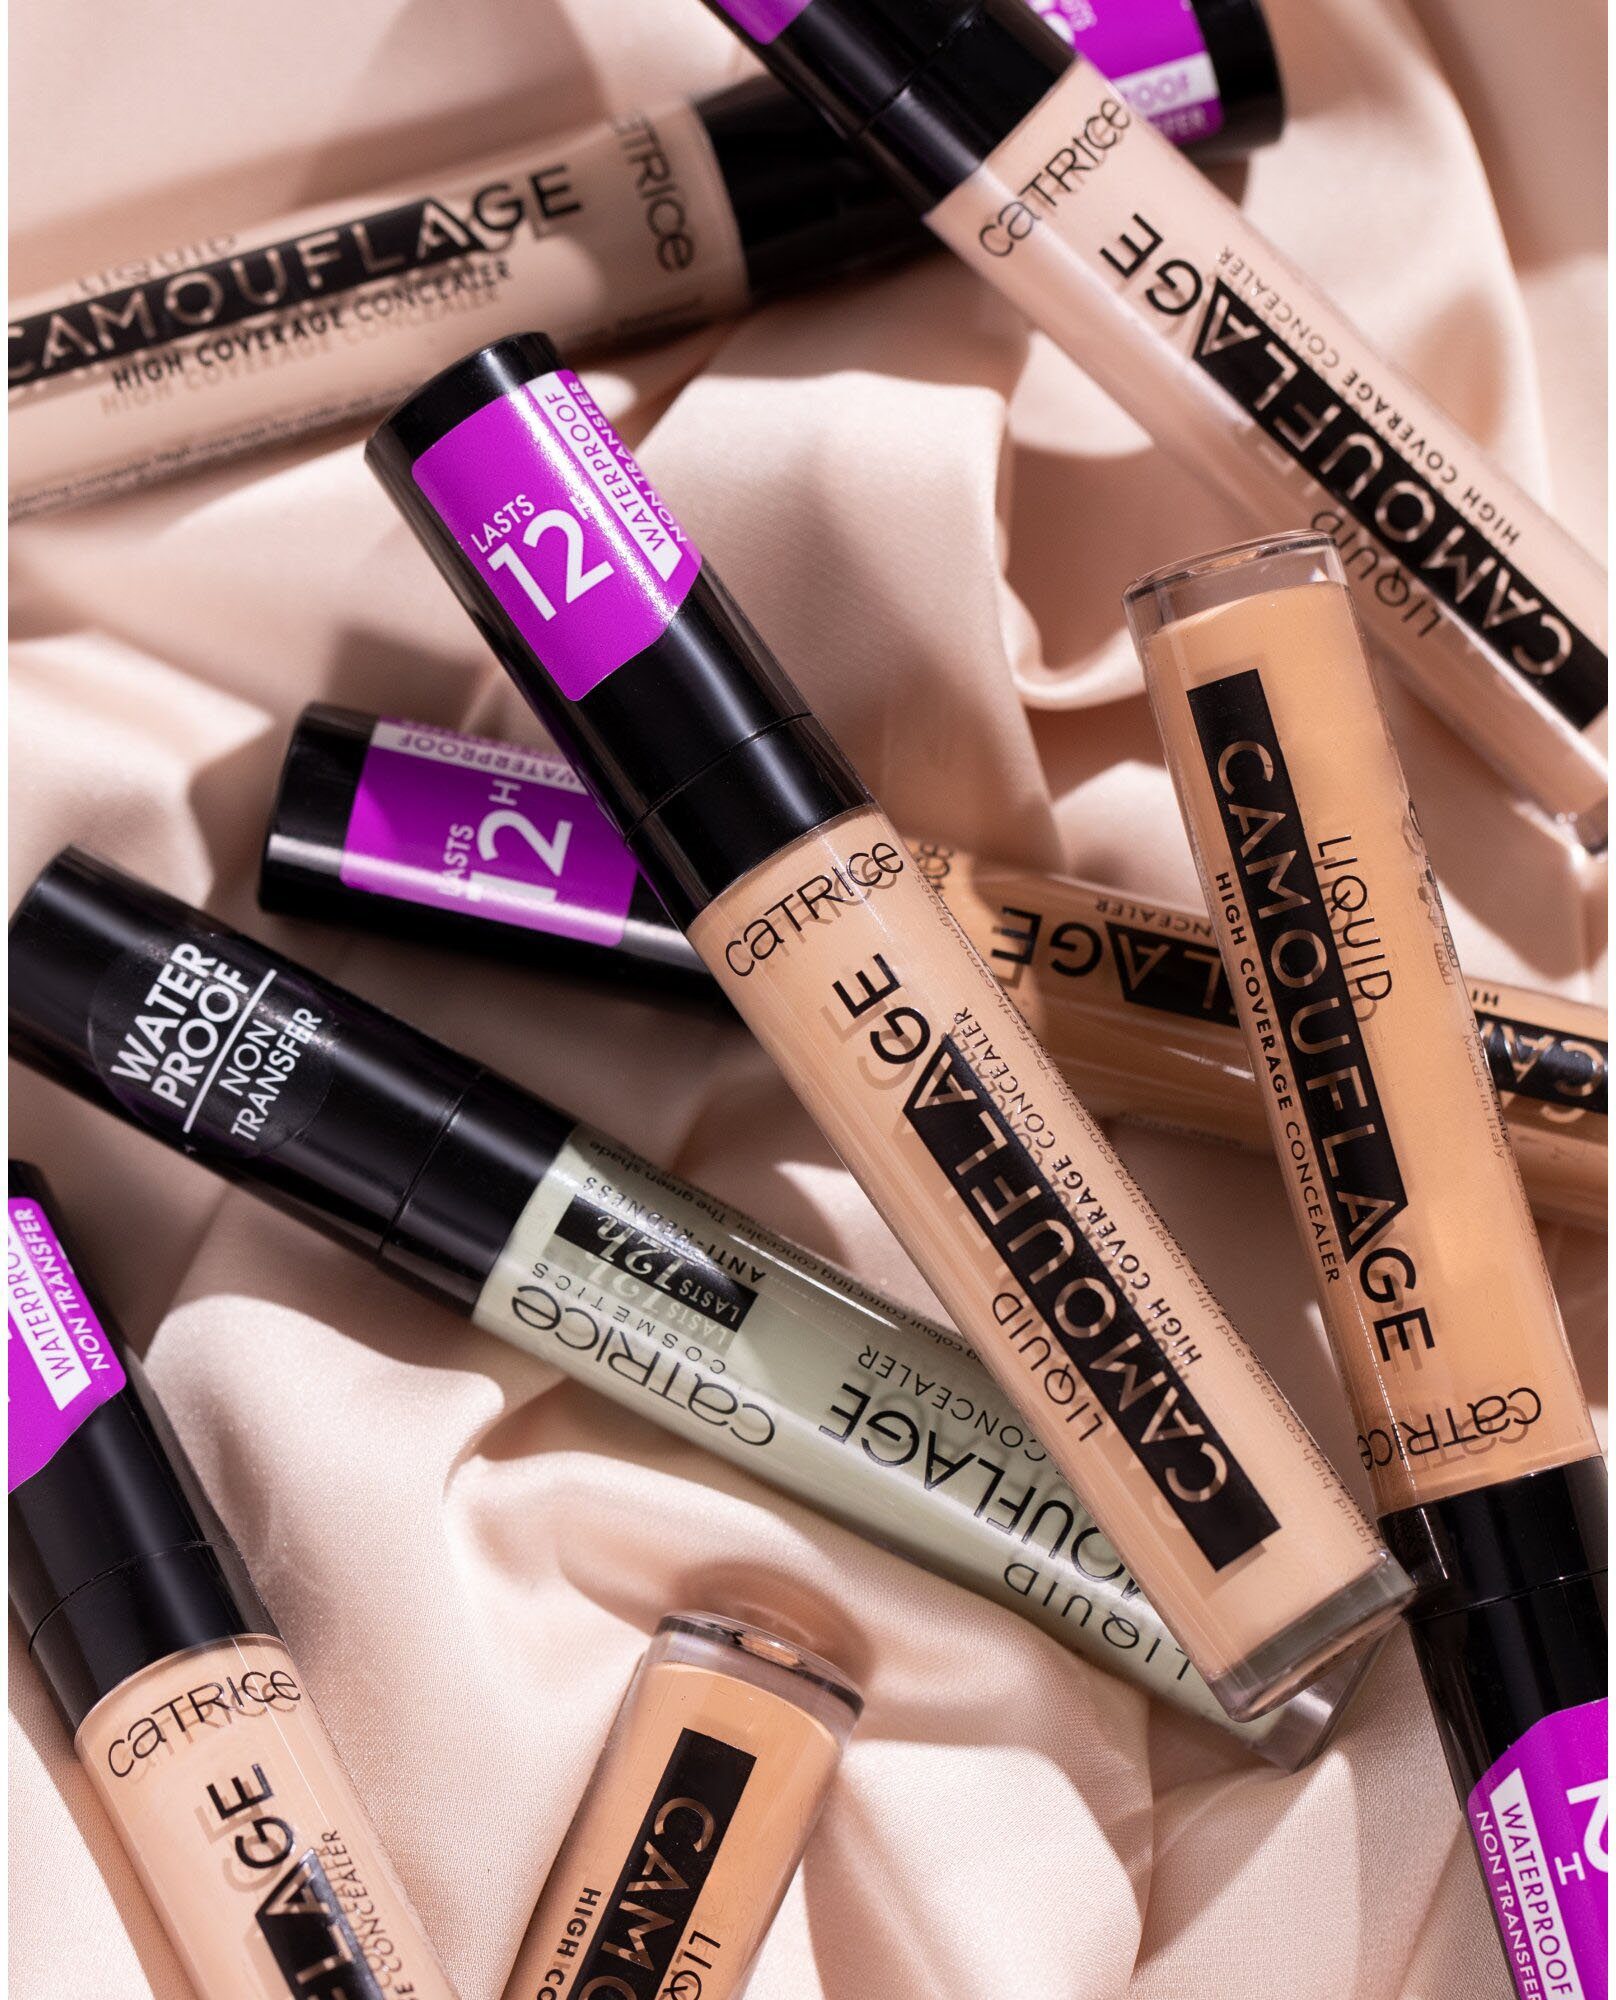 Catrice Concealer Liquid Camouflage High Coverage, Pack Porcellain 3er